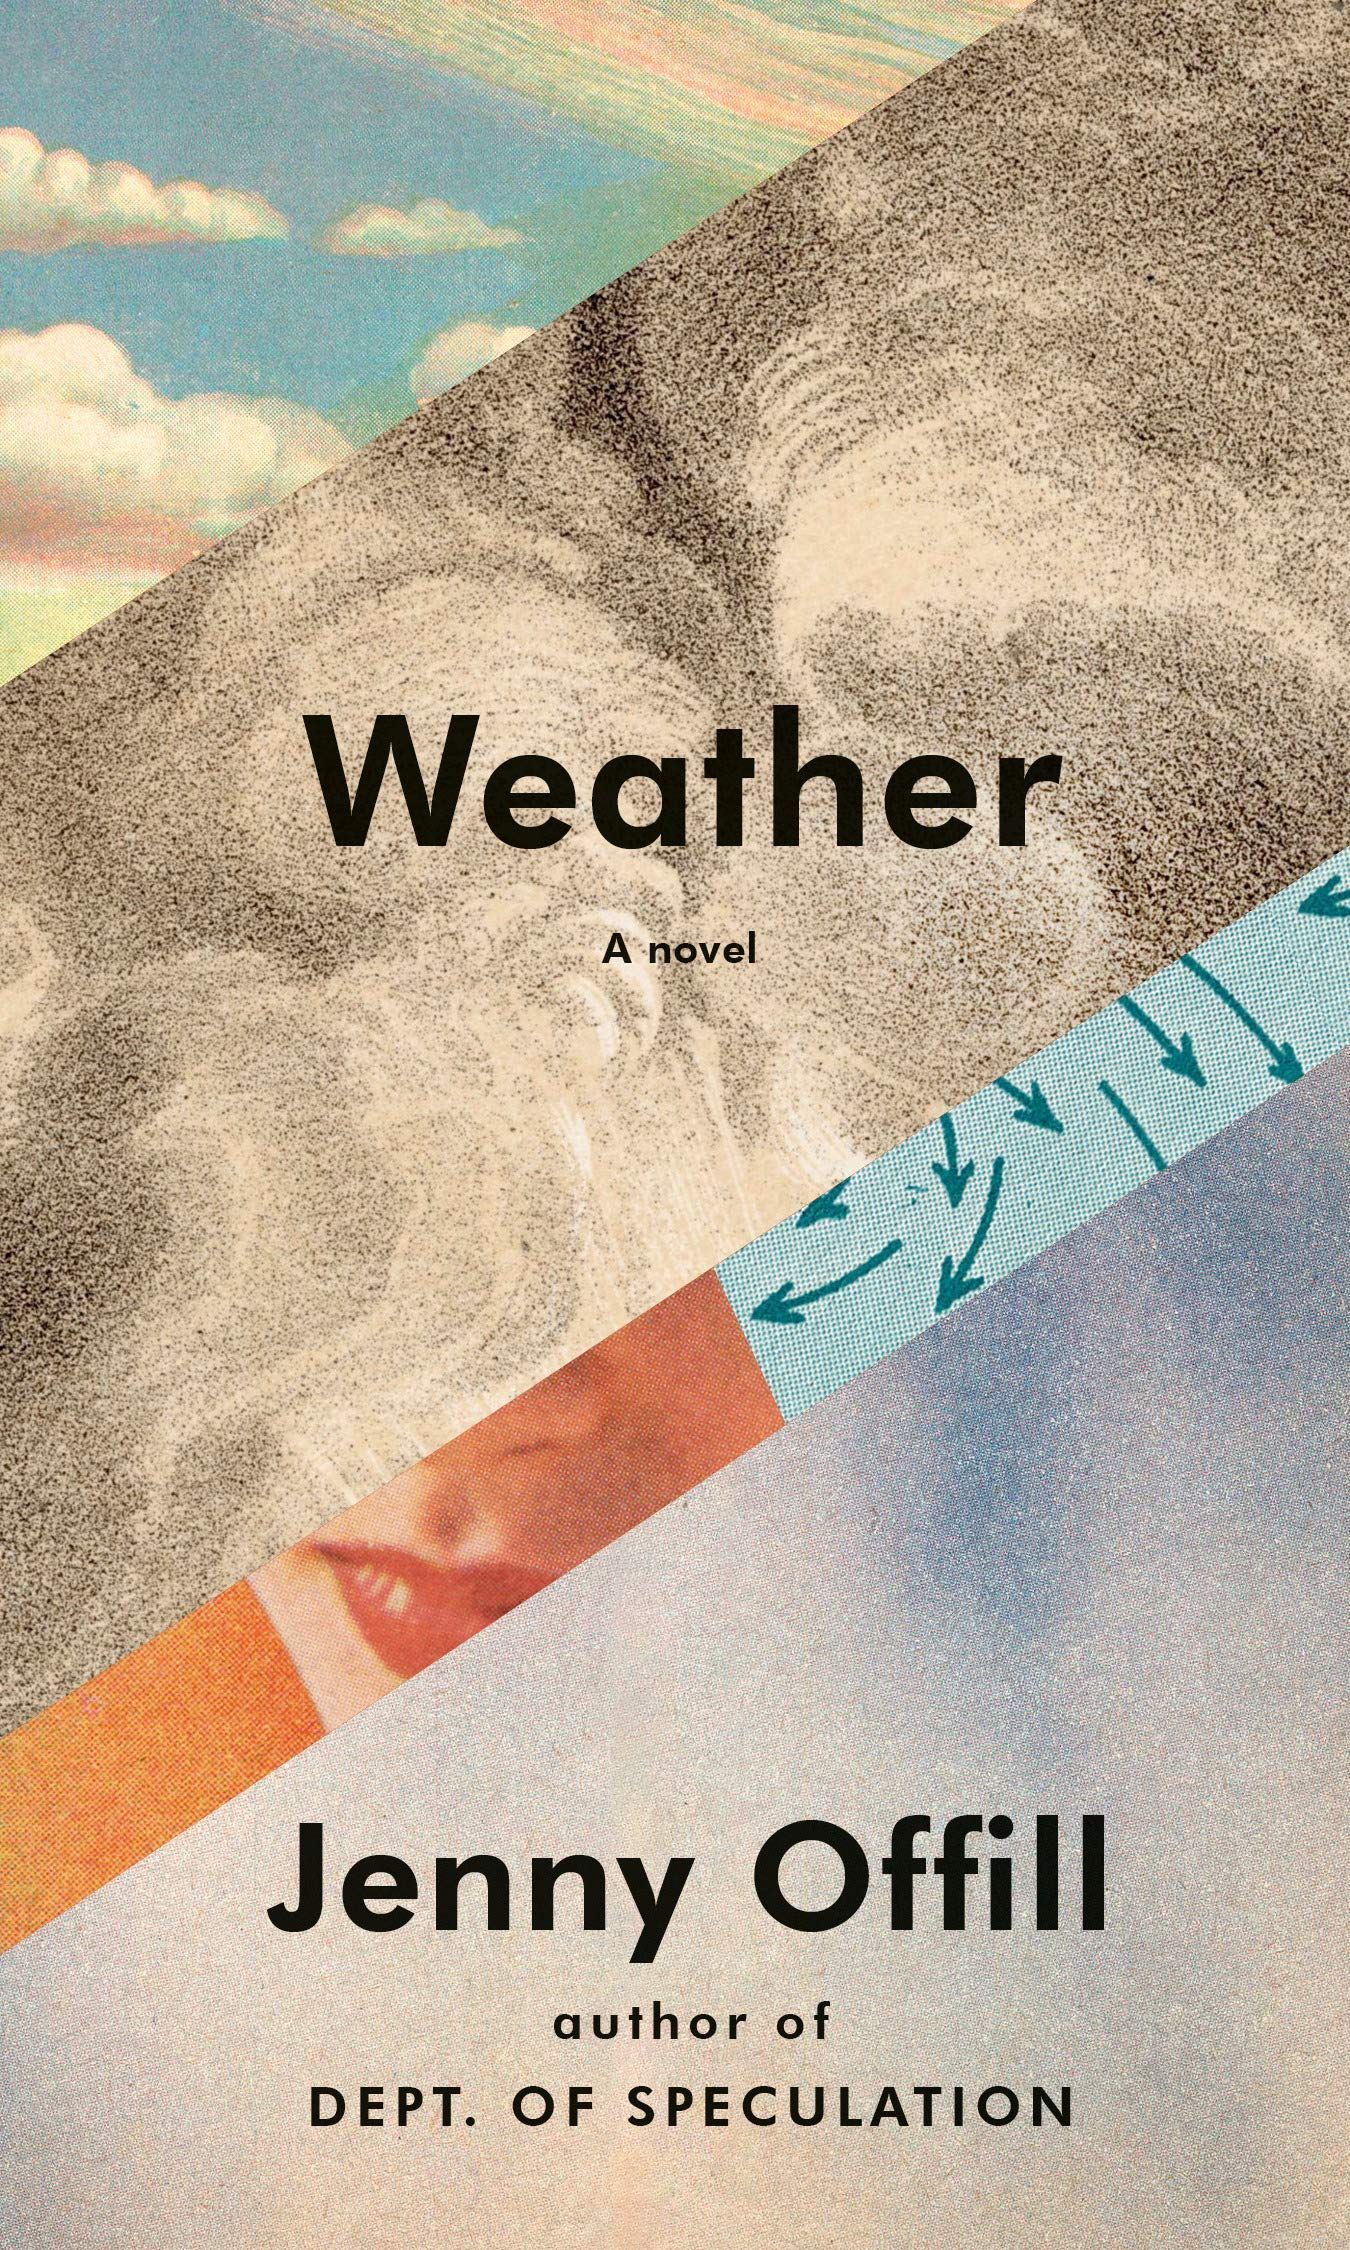 Survival Tips: On Jenny Offill’s “Weather”